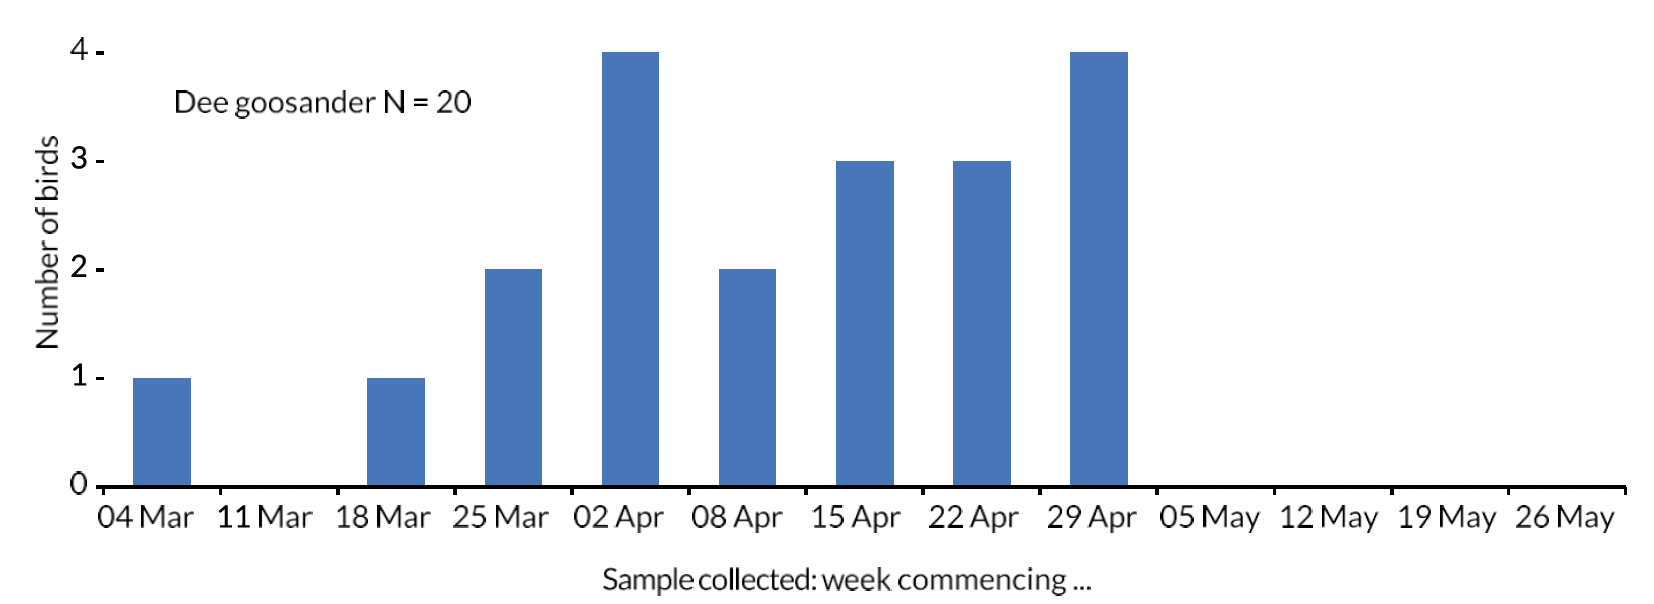 Bar chart of the number of River Dee Goosanders collected each week during the 2019 smolt run period.